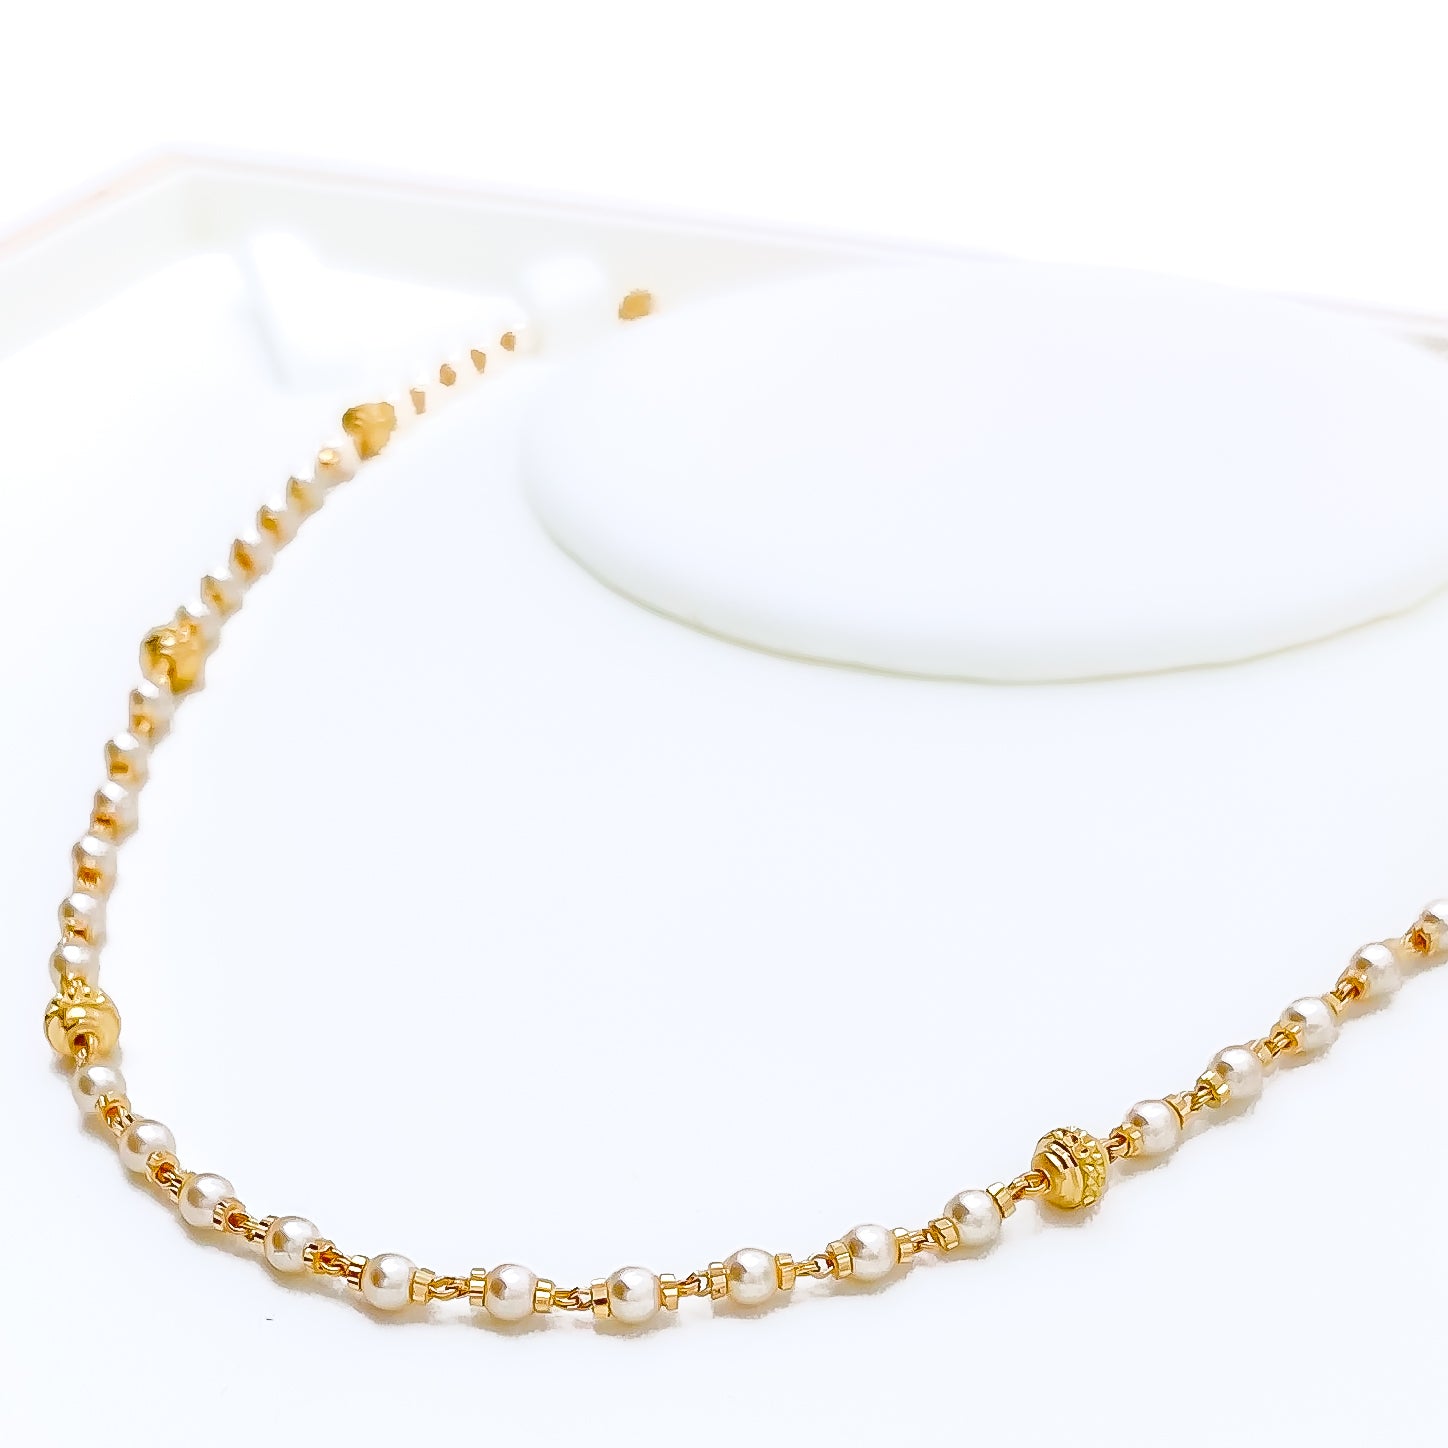 235-GN3628 - 22K Gold Necklace for Women with Chinese Pearls